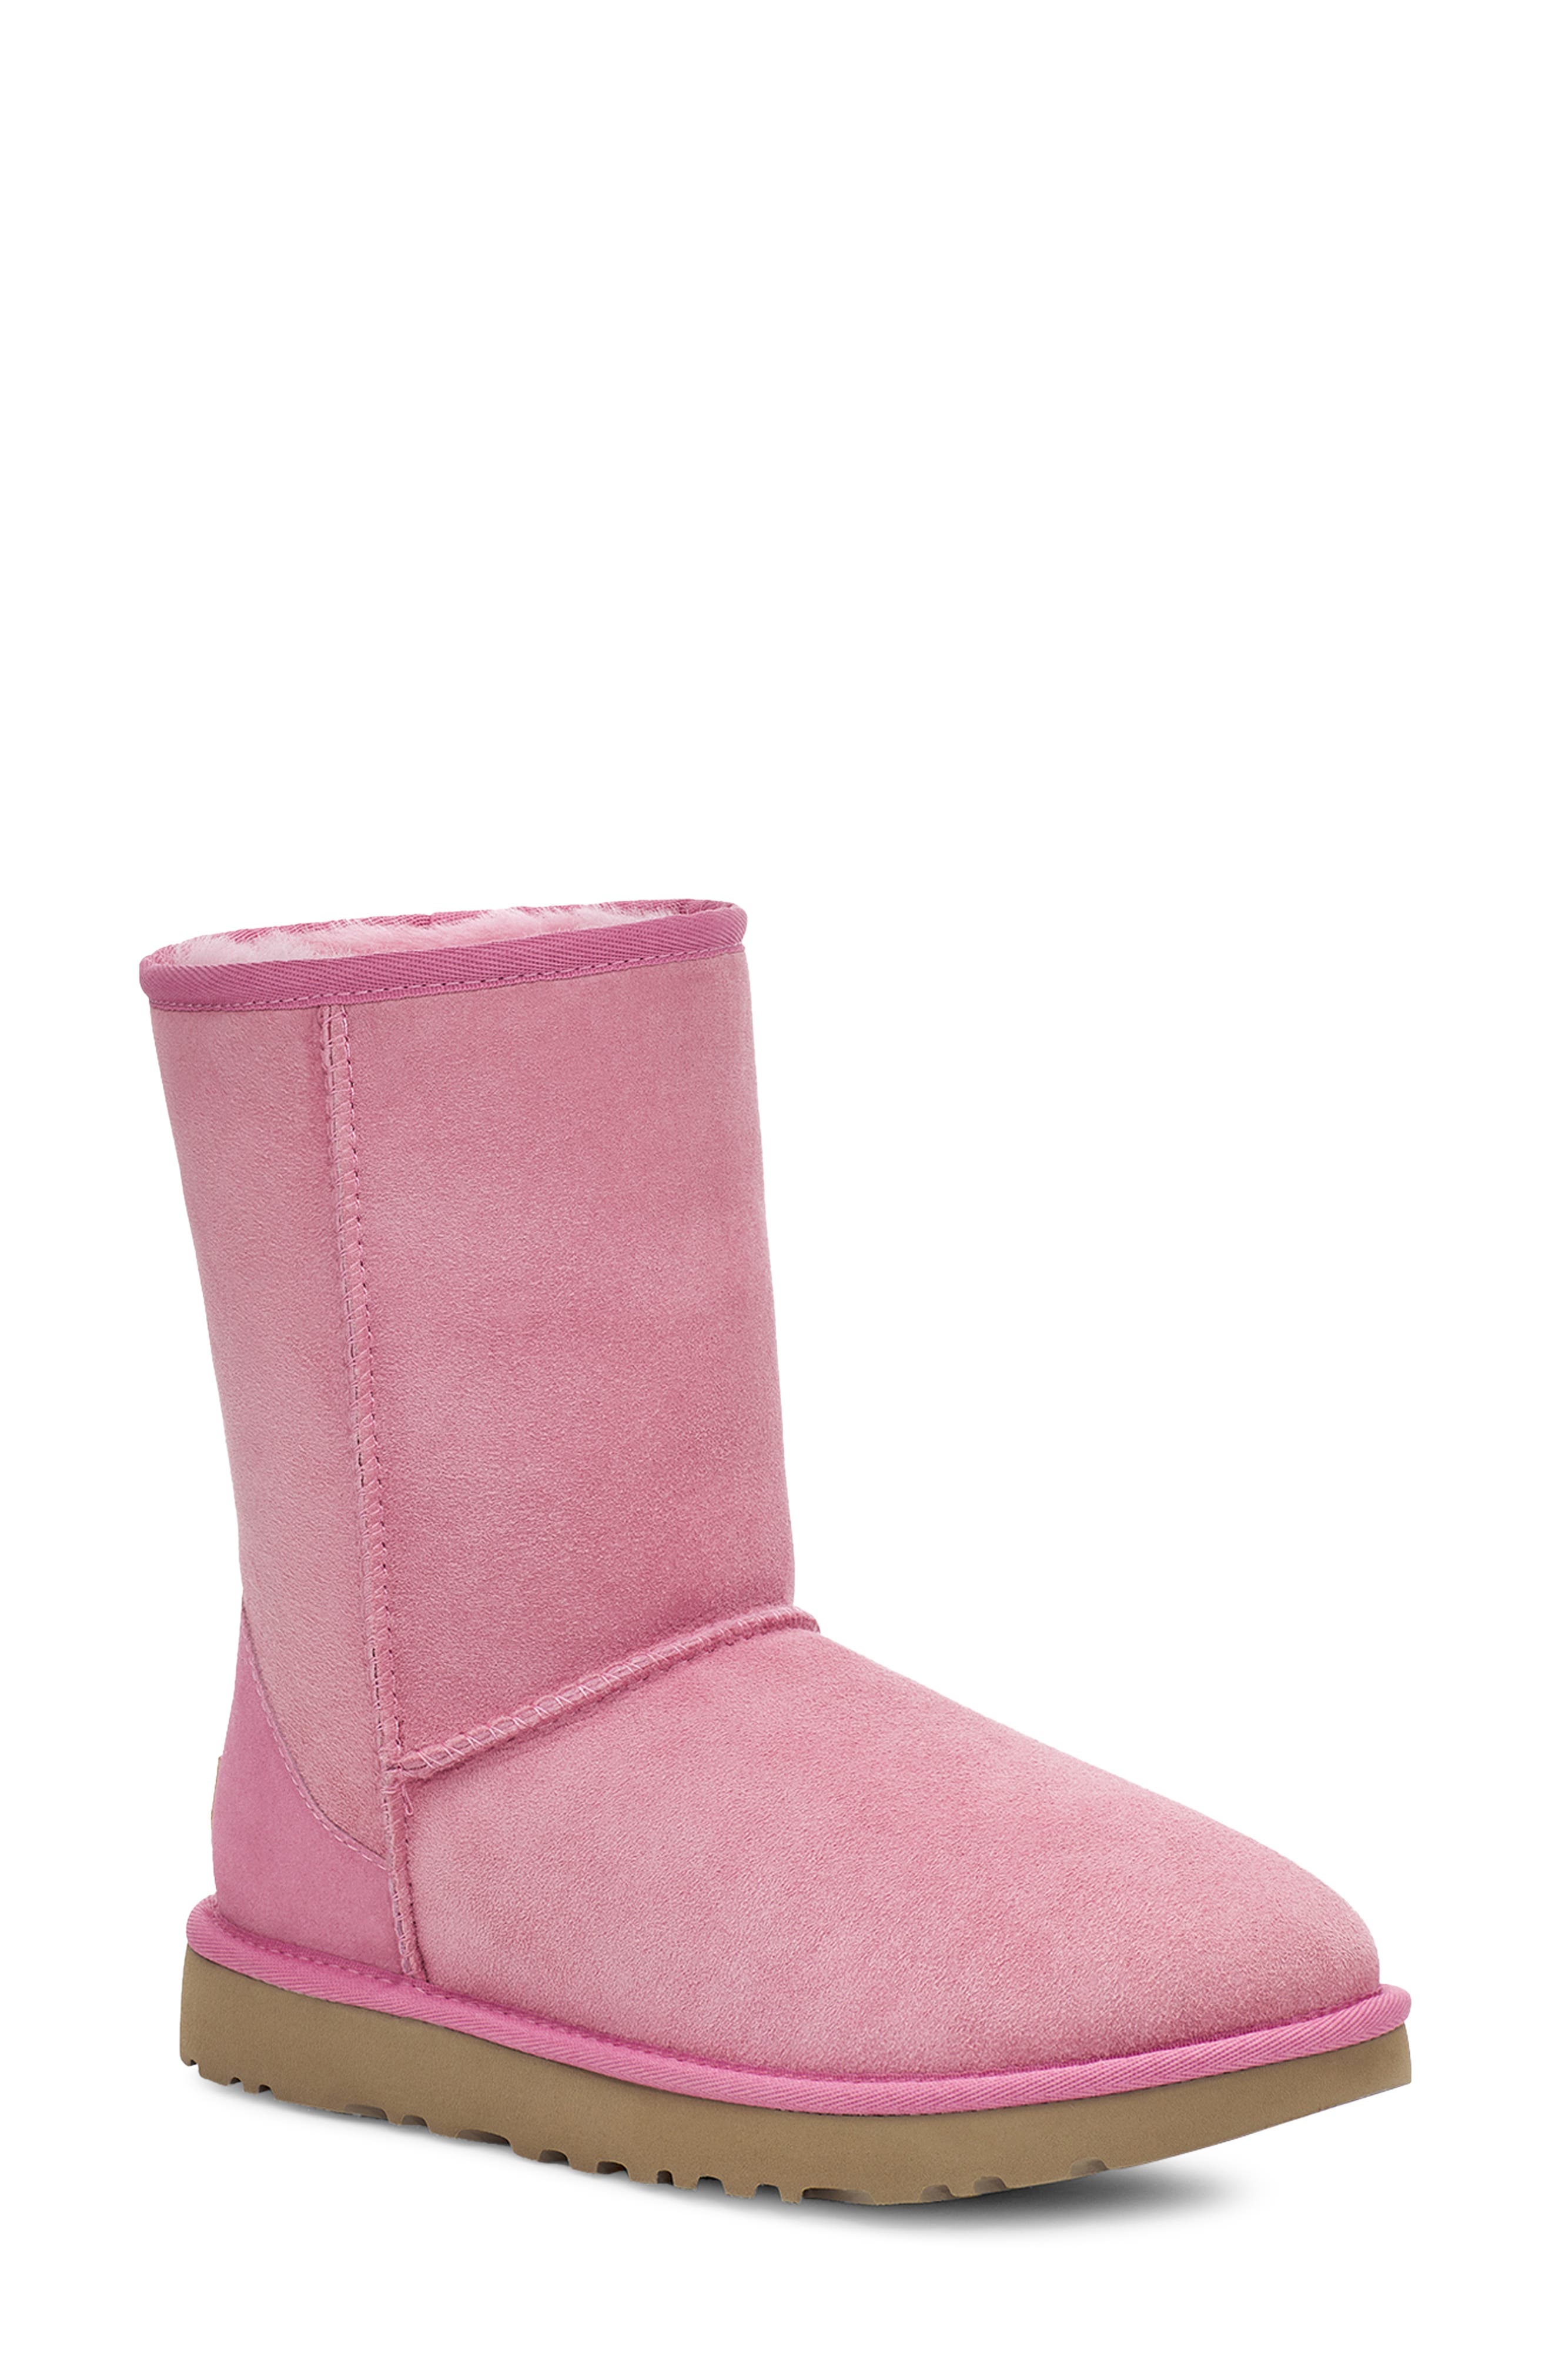 green ugg boots on sale